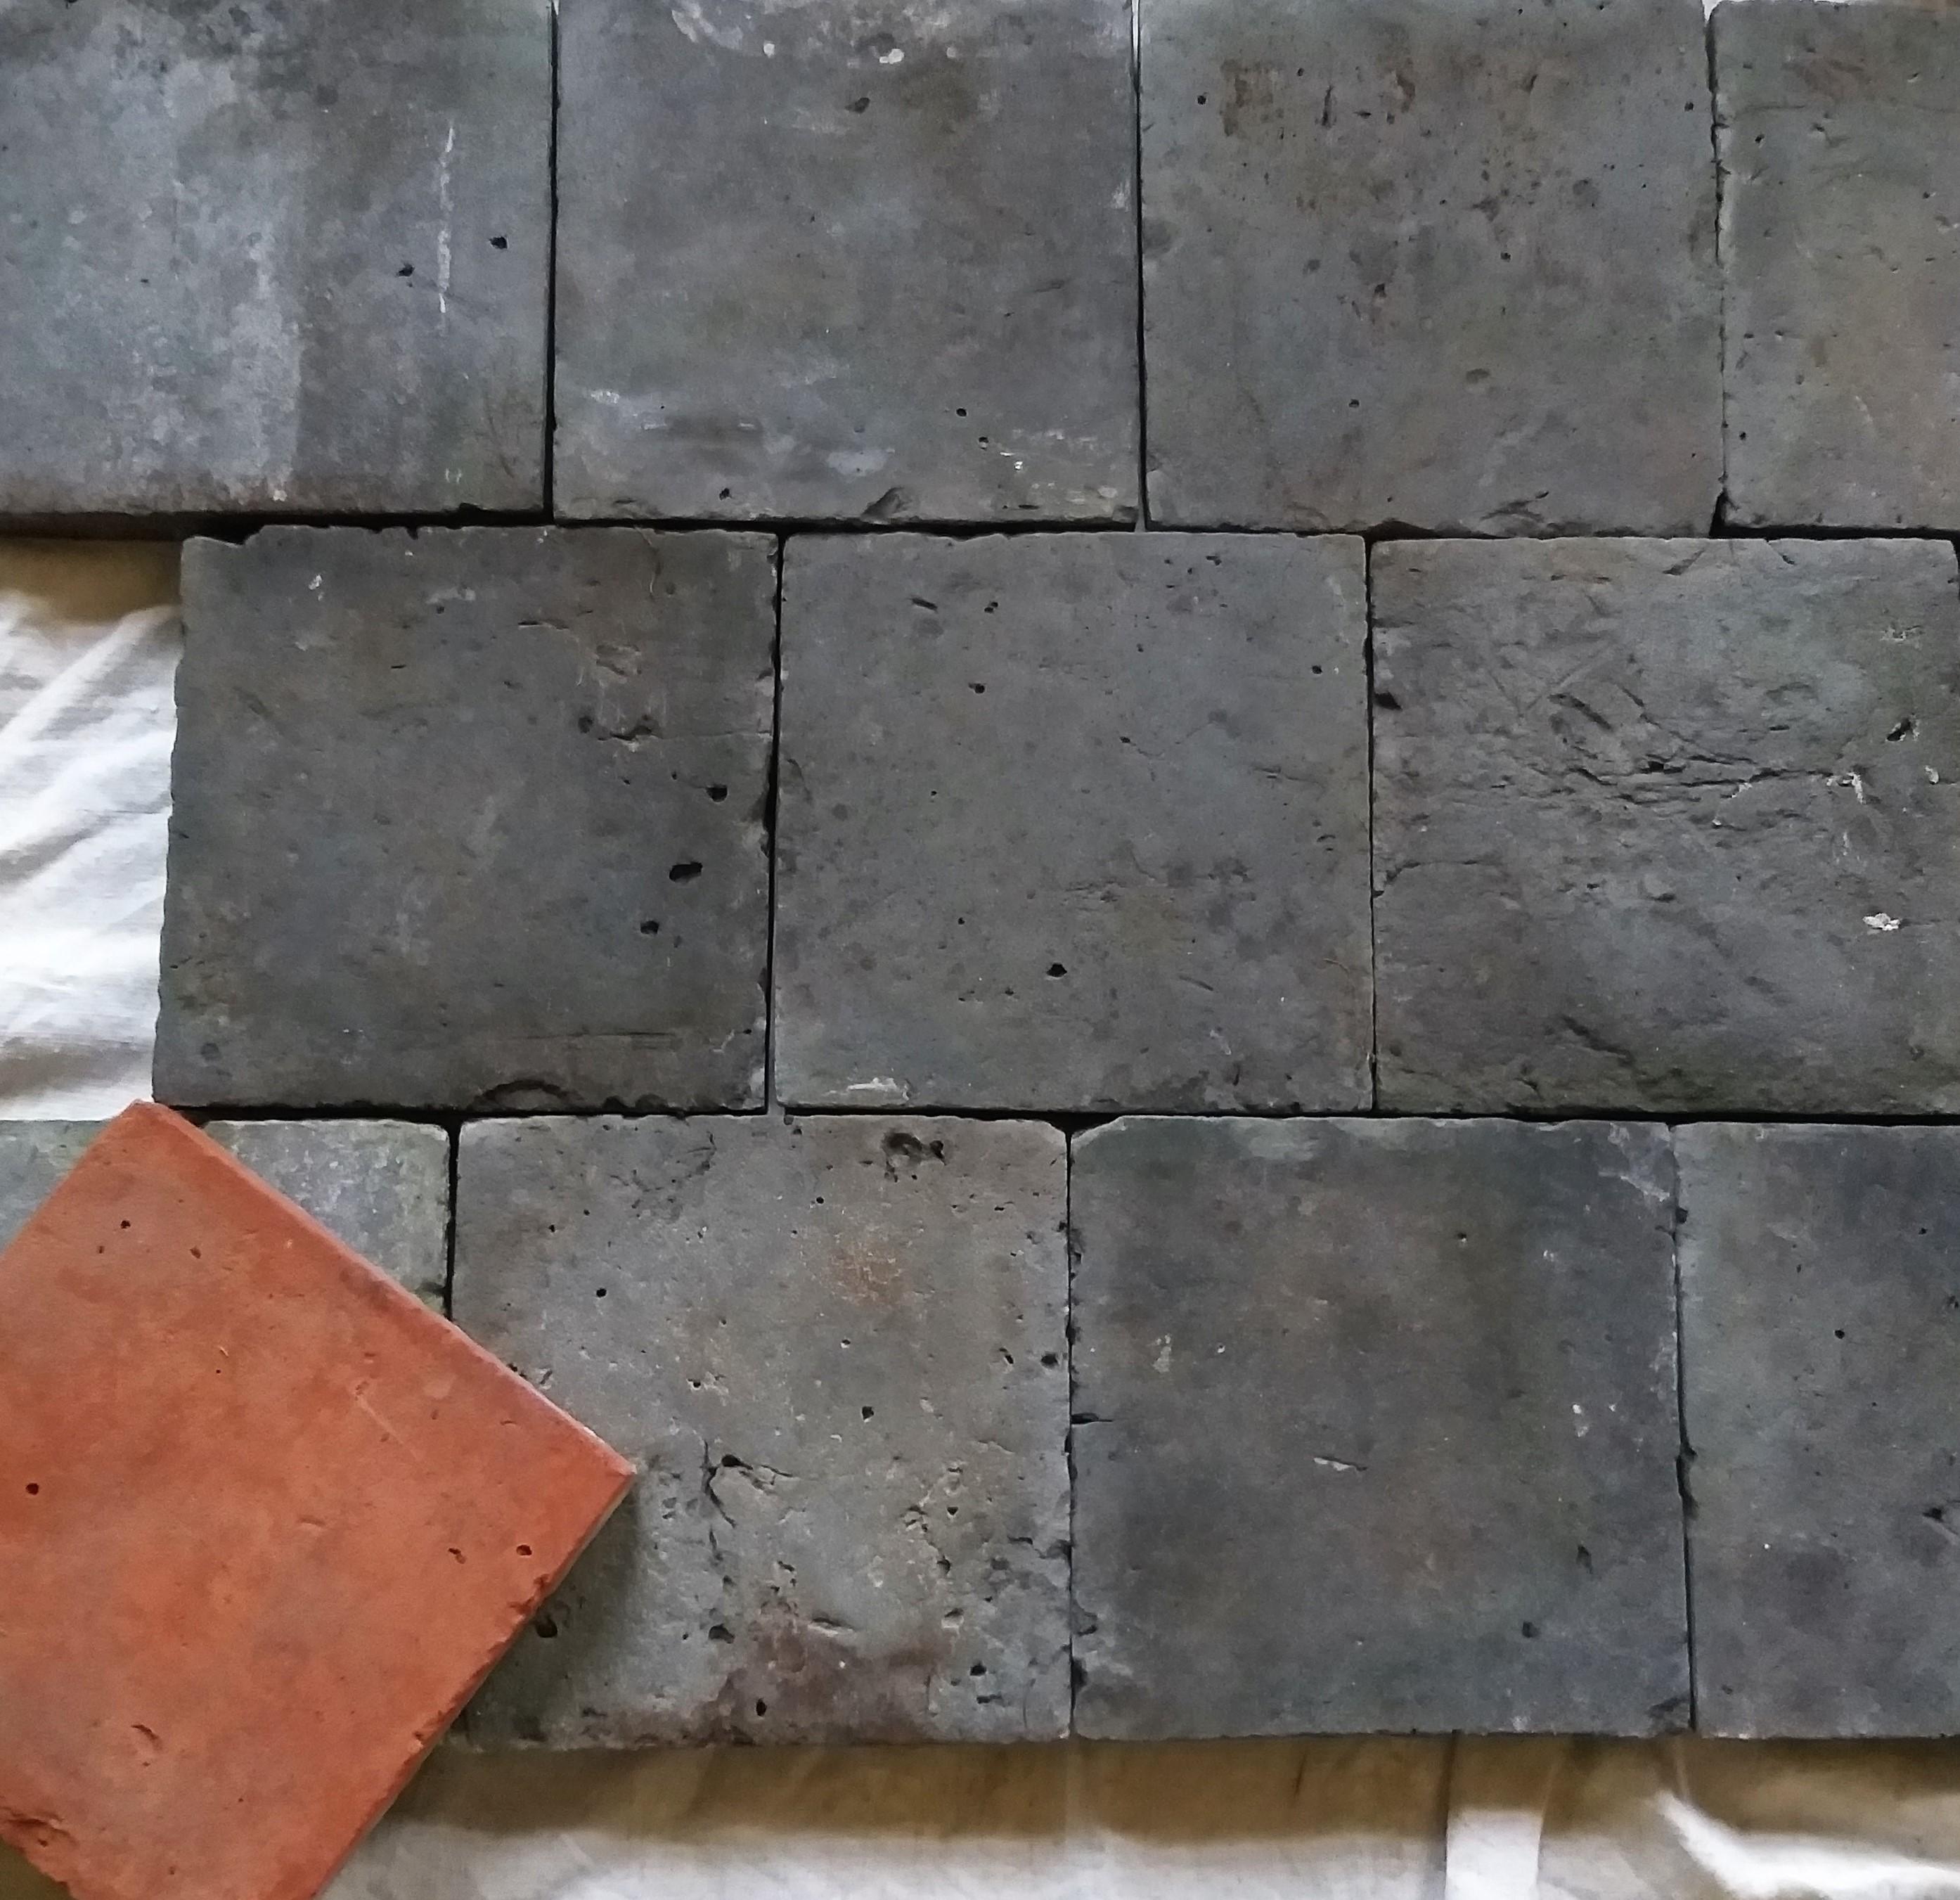 30 square meters of old terracotta floortiles in stock. Dating back to the 18th and 19th century. The old terracotta has extra ordinary longevity and a timeless appeal. There is only 30 square meters deliverable, but can be enlarged to mix them with